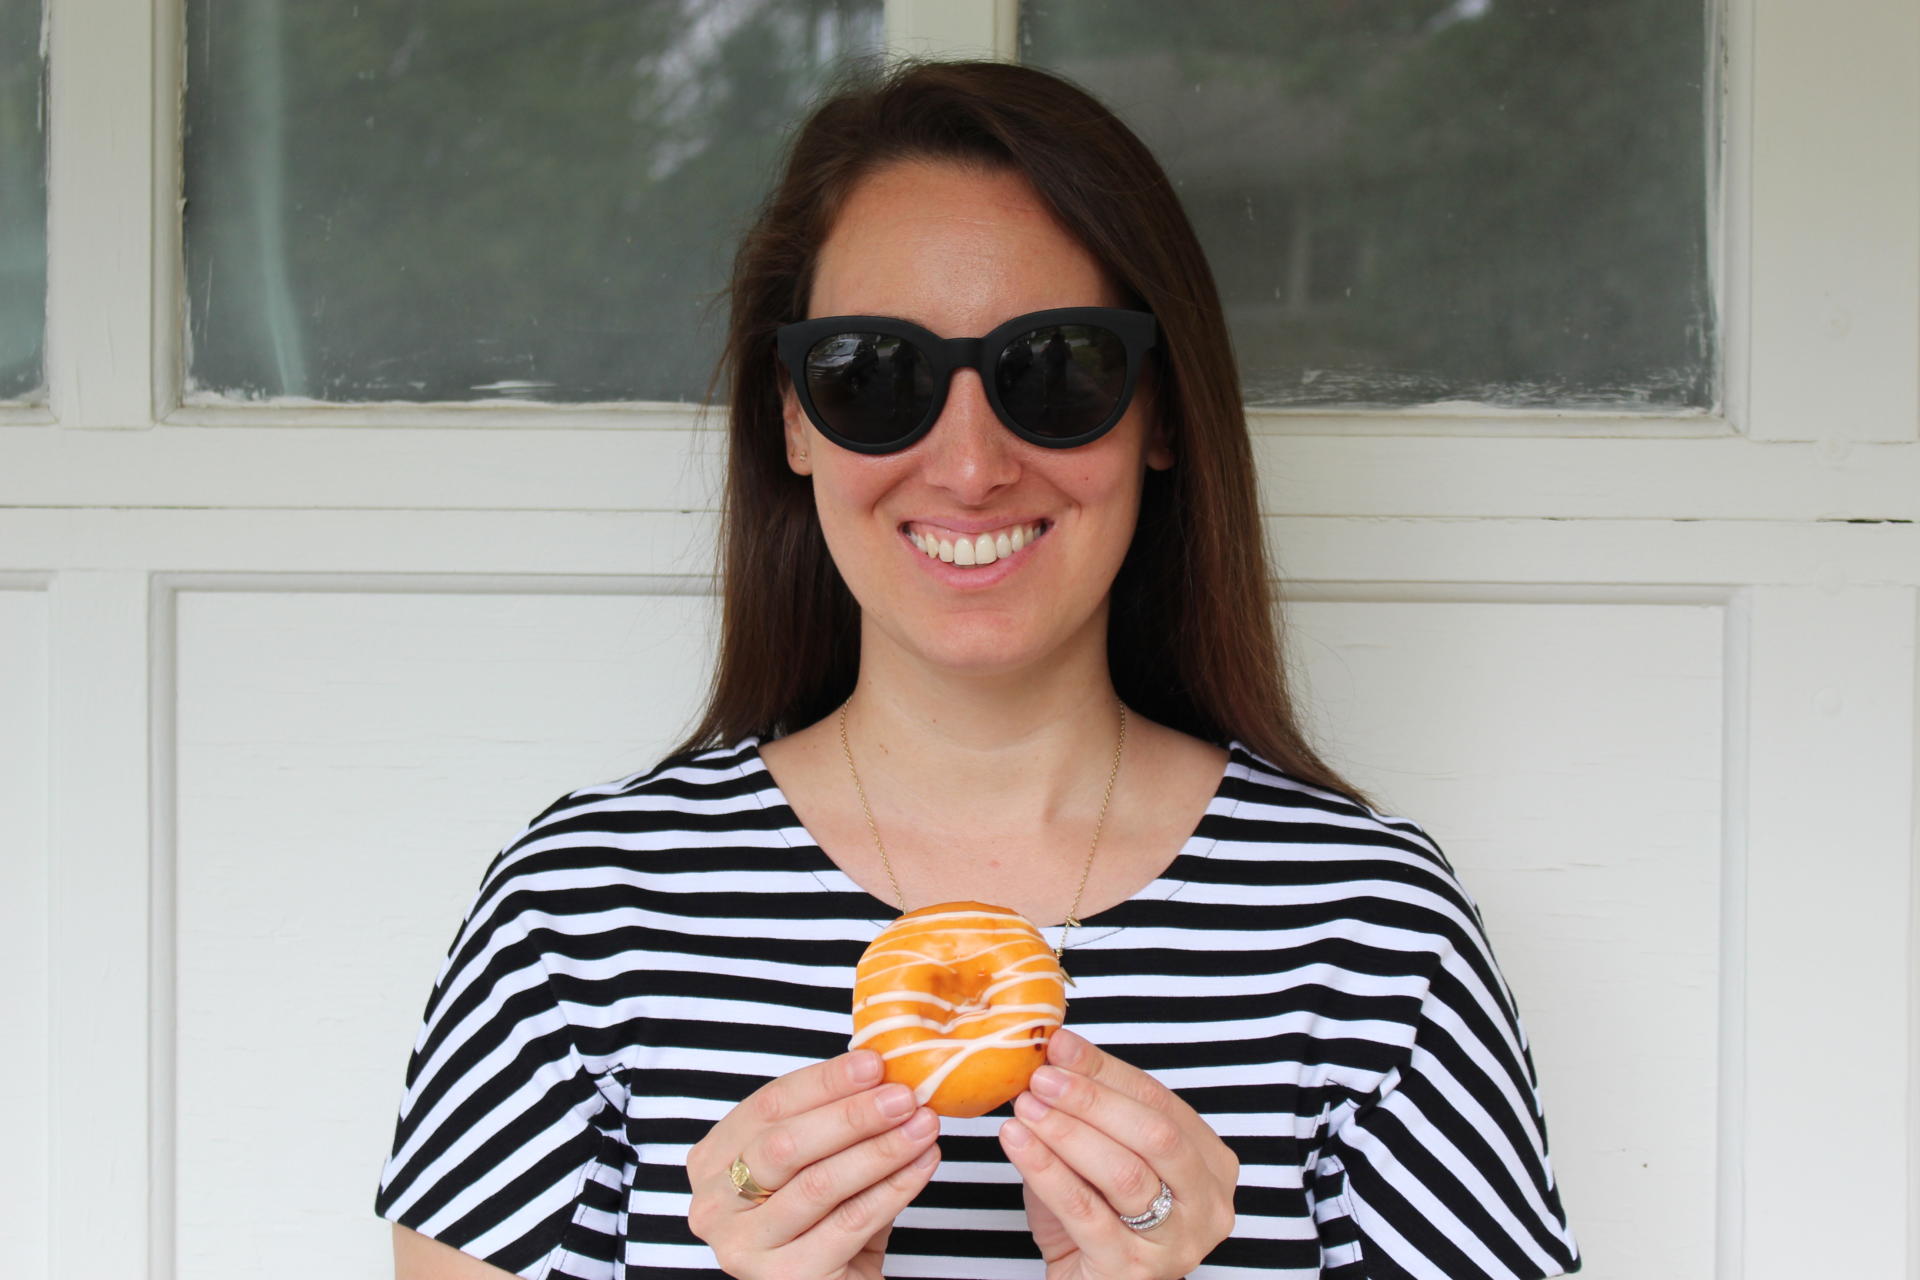 STYLE: Stripes and Donuts